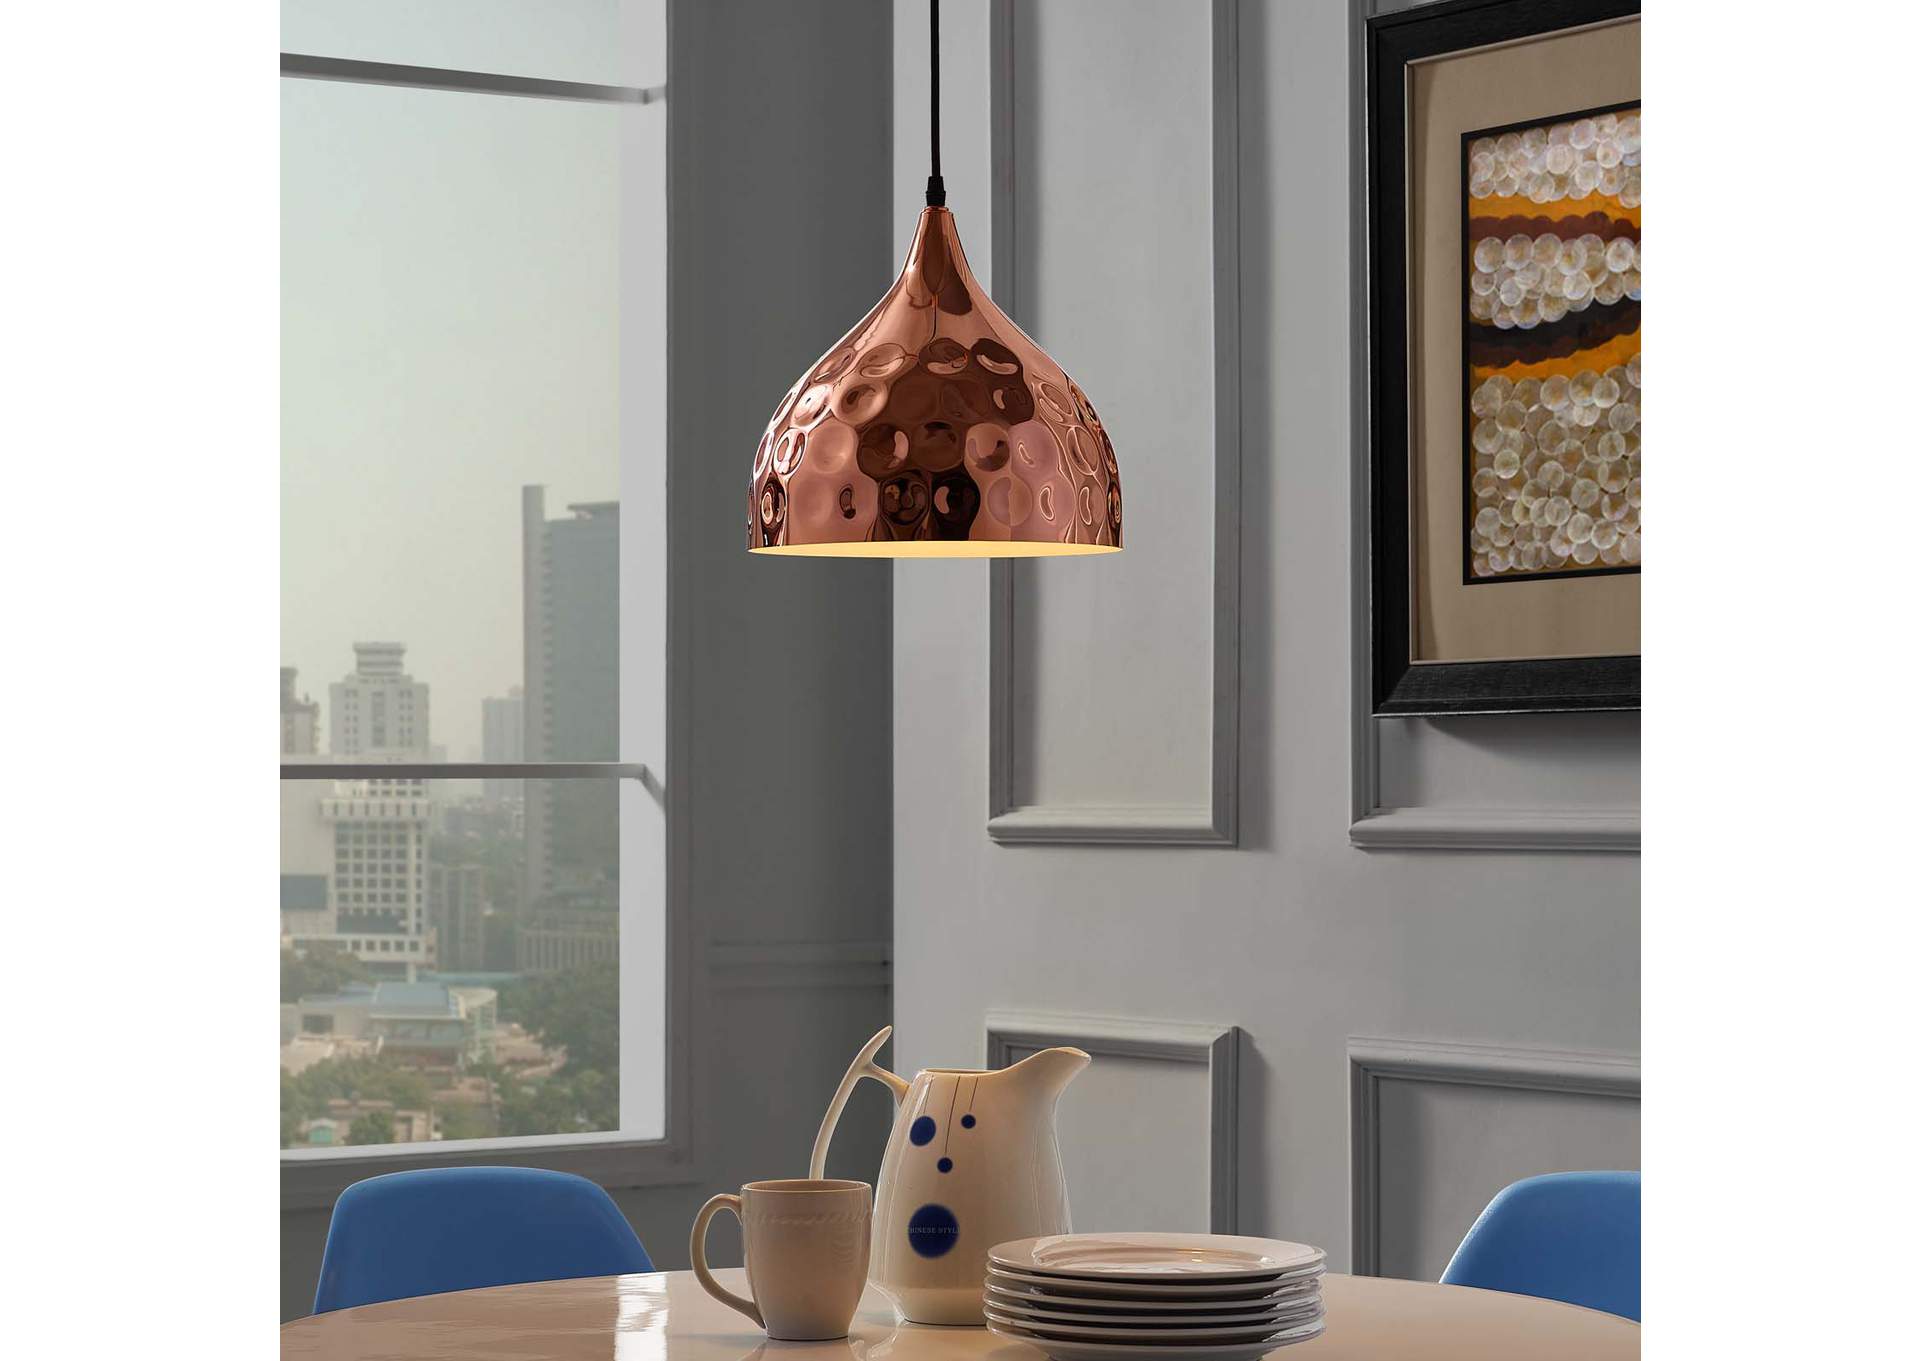 Dimple 11" Bell-Shaped Rose Gold Pendant Light,Modway